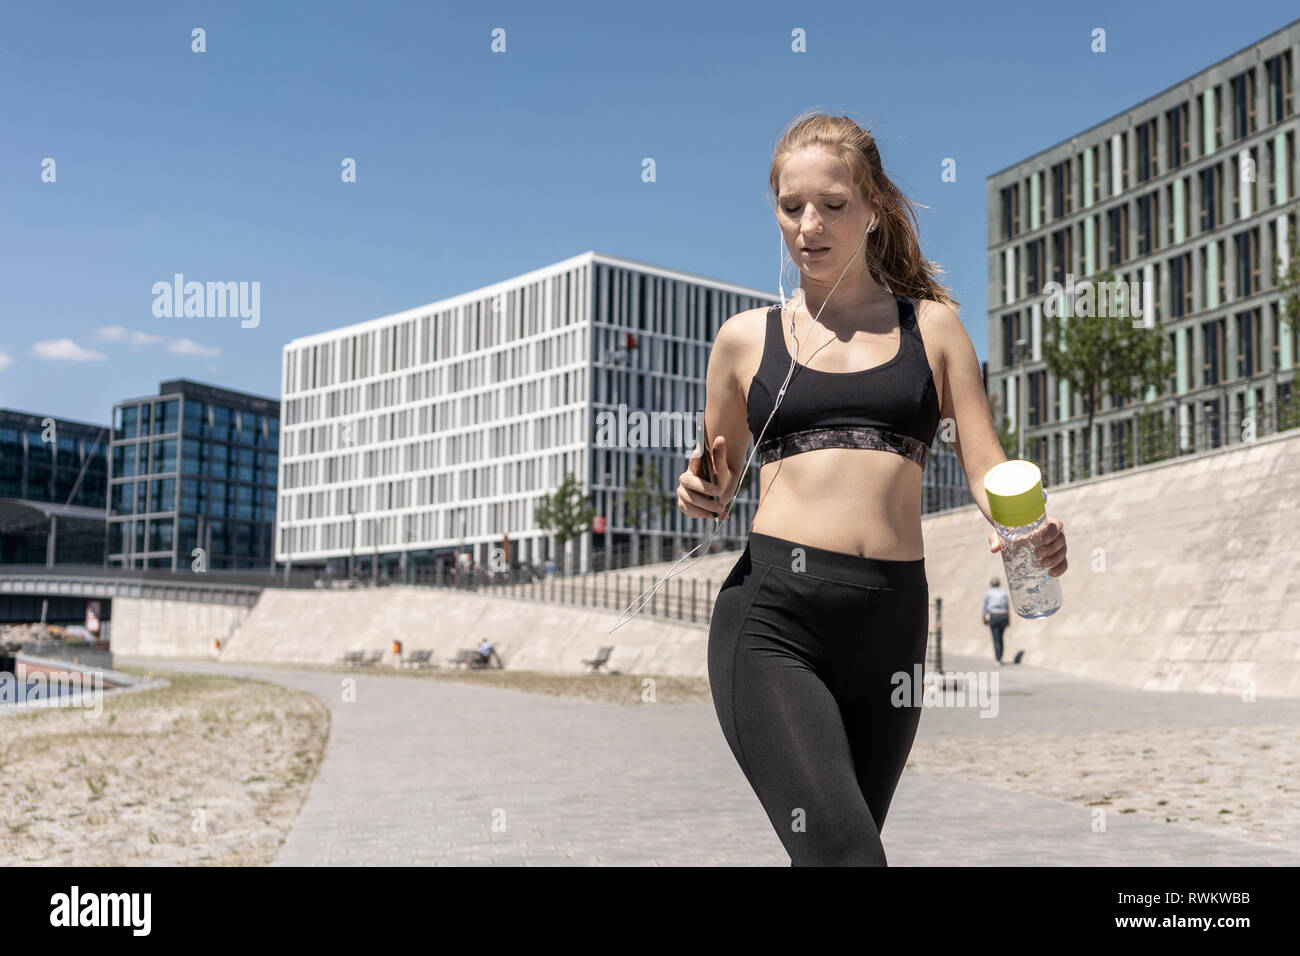 Young woman running and using smartphone in city, Berlin, Germany Stock Photo